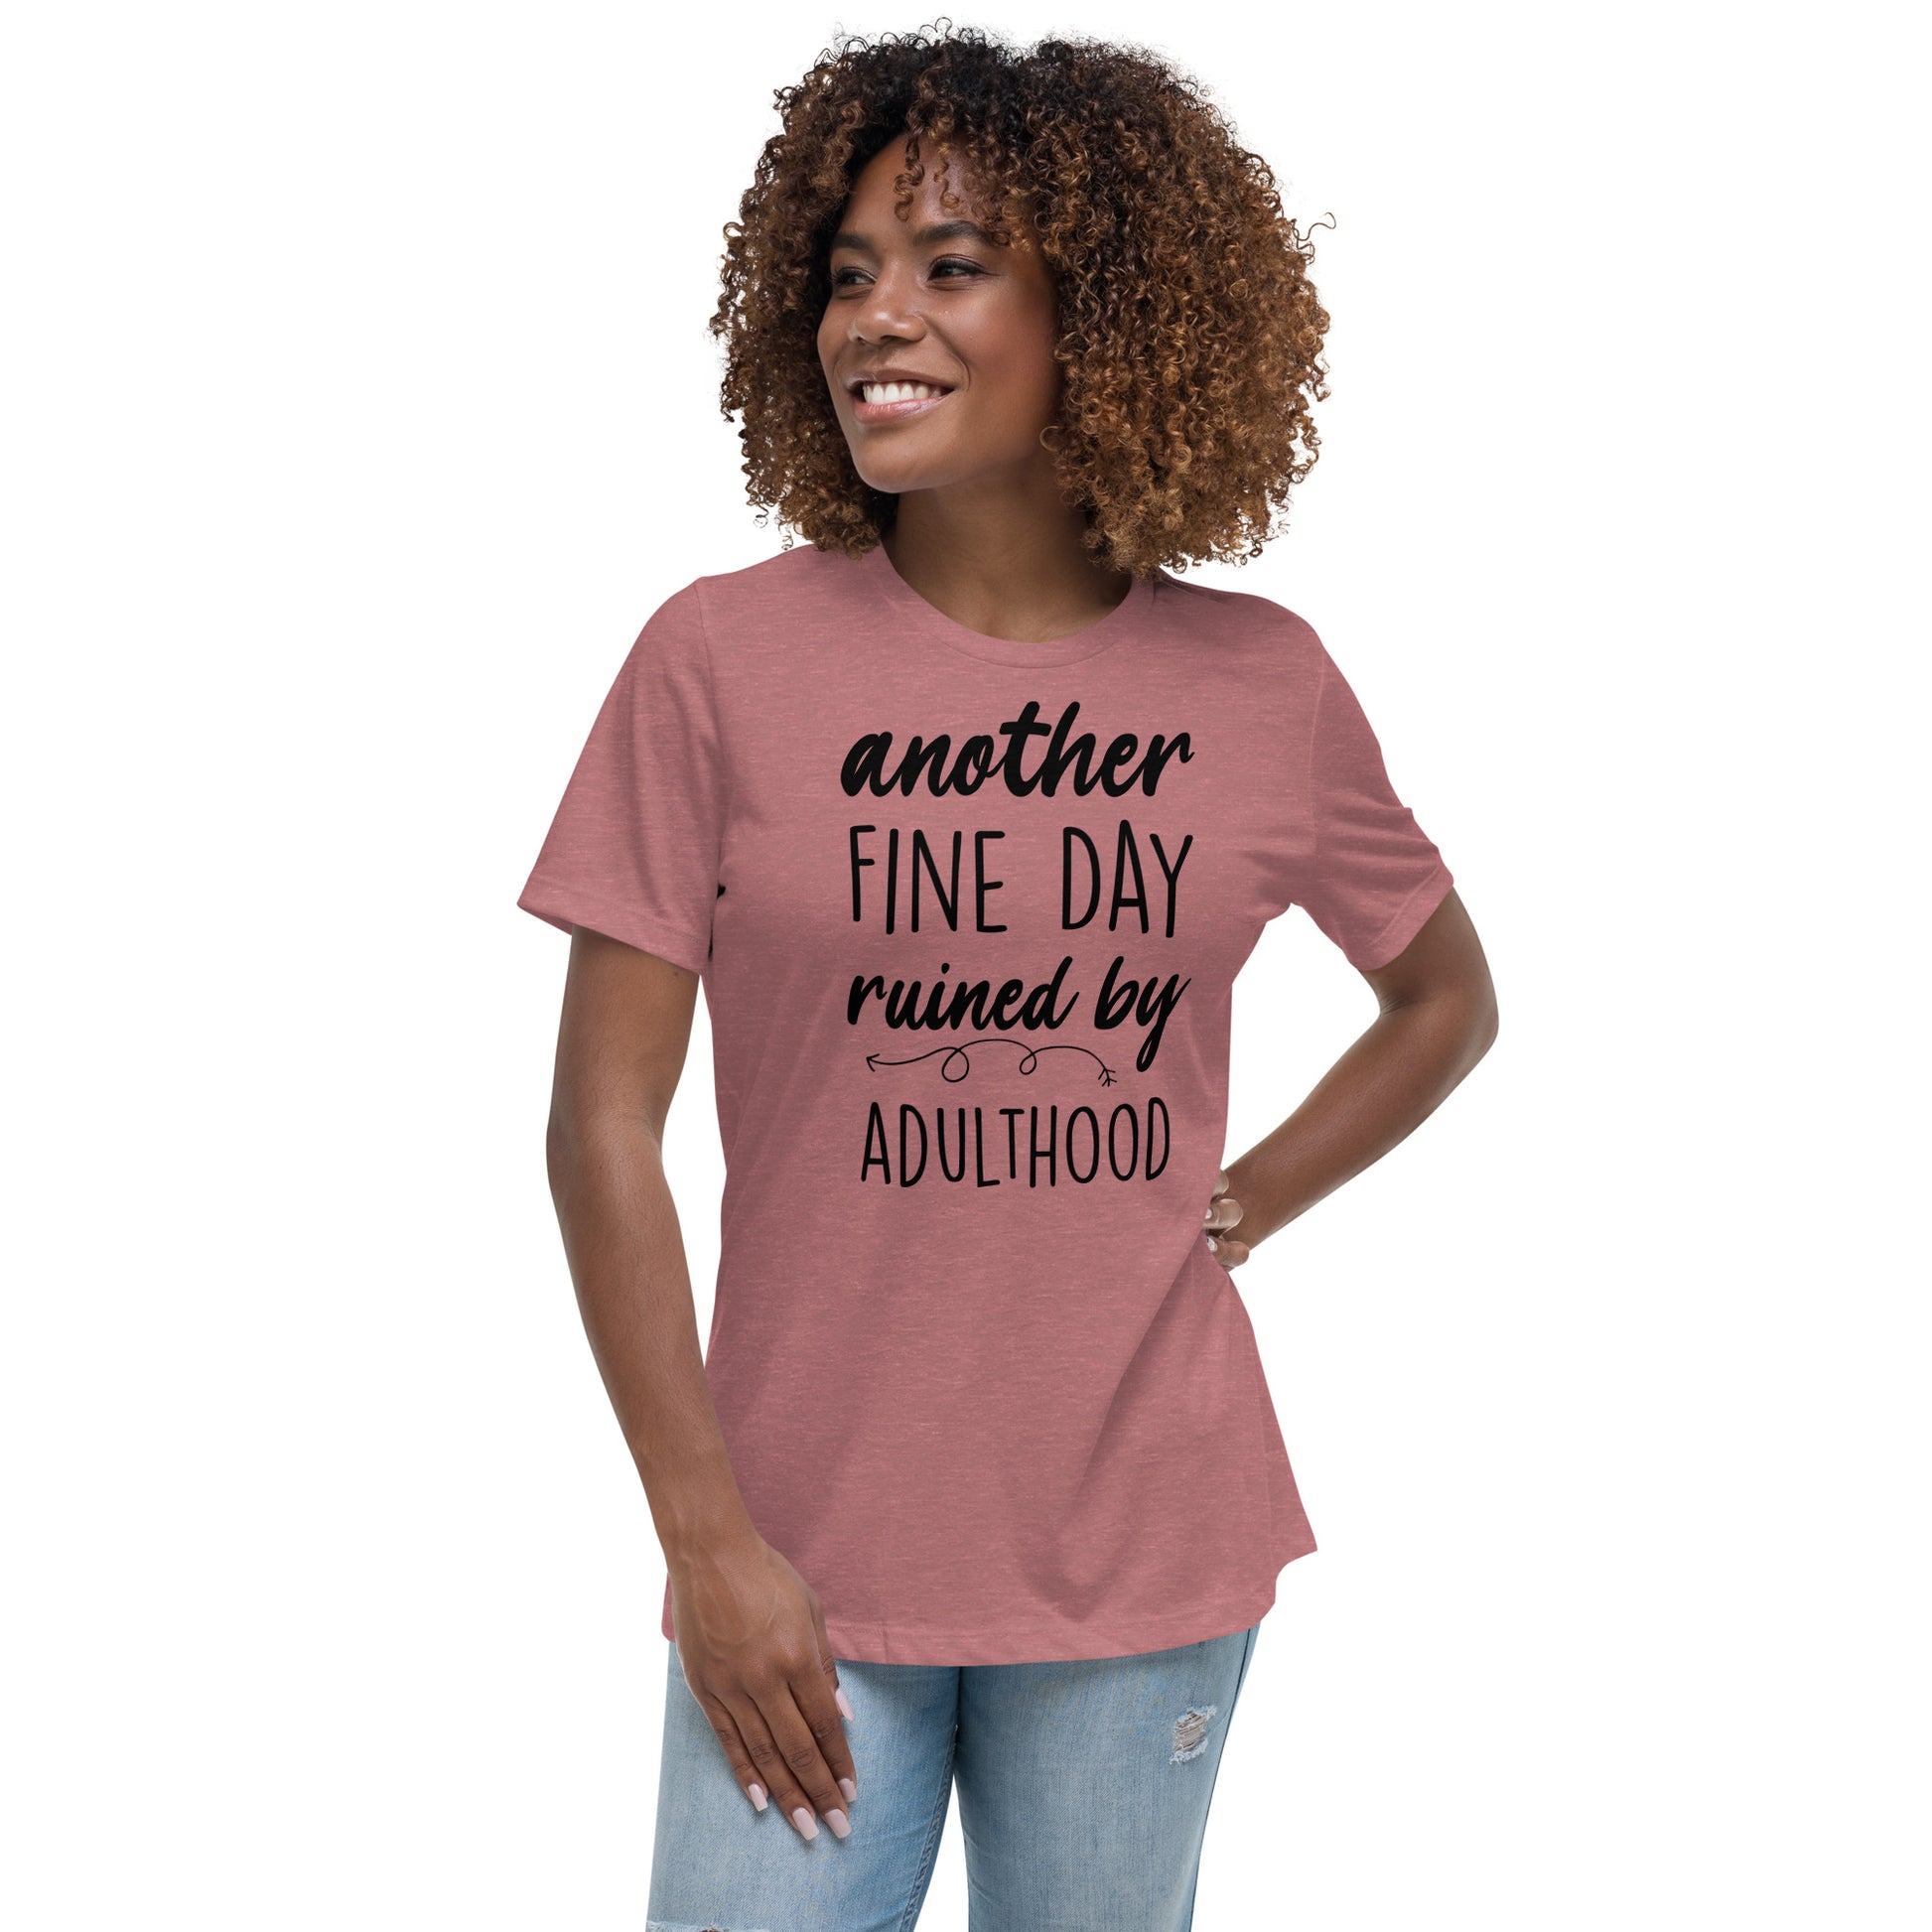 Another Fine Day Ruined by Adulthood Tshirt